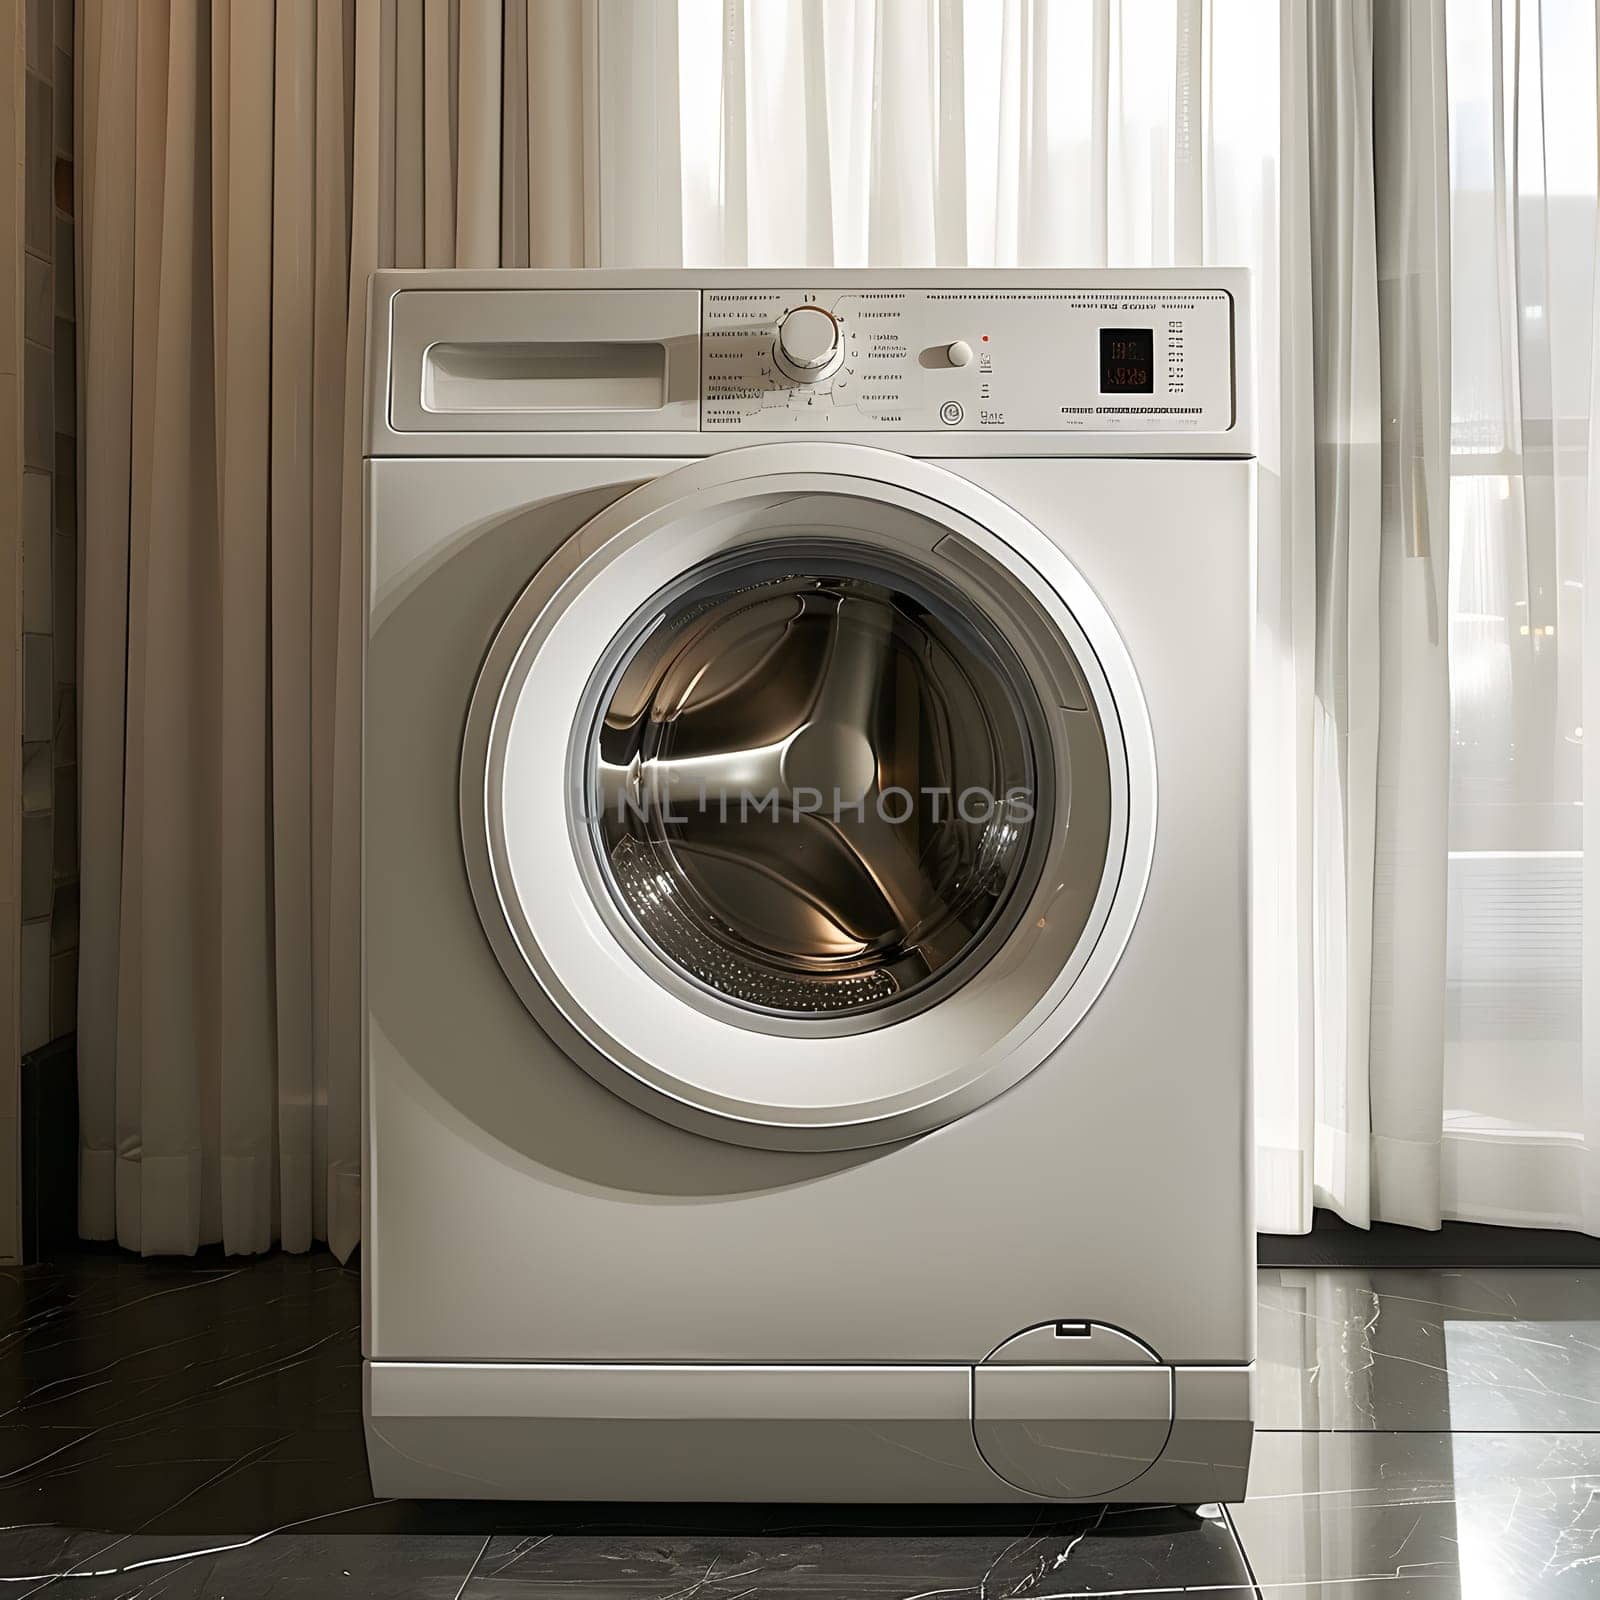 A white washing machine is placed in a laundry room next to a window, complemented by a clothes dryer. This home appliance is a fixture designed with automotive elements, powered by gas